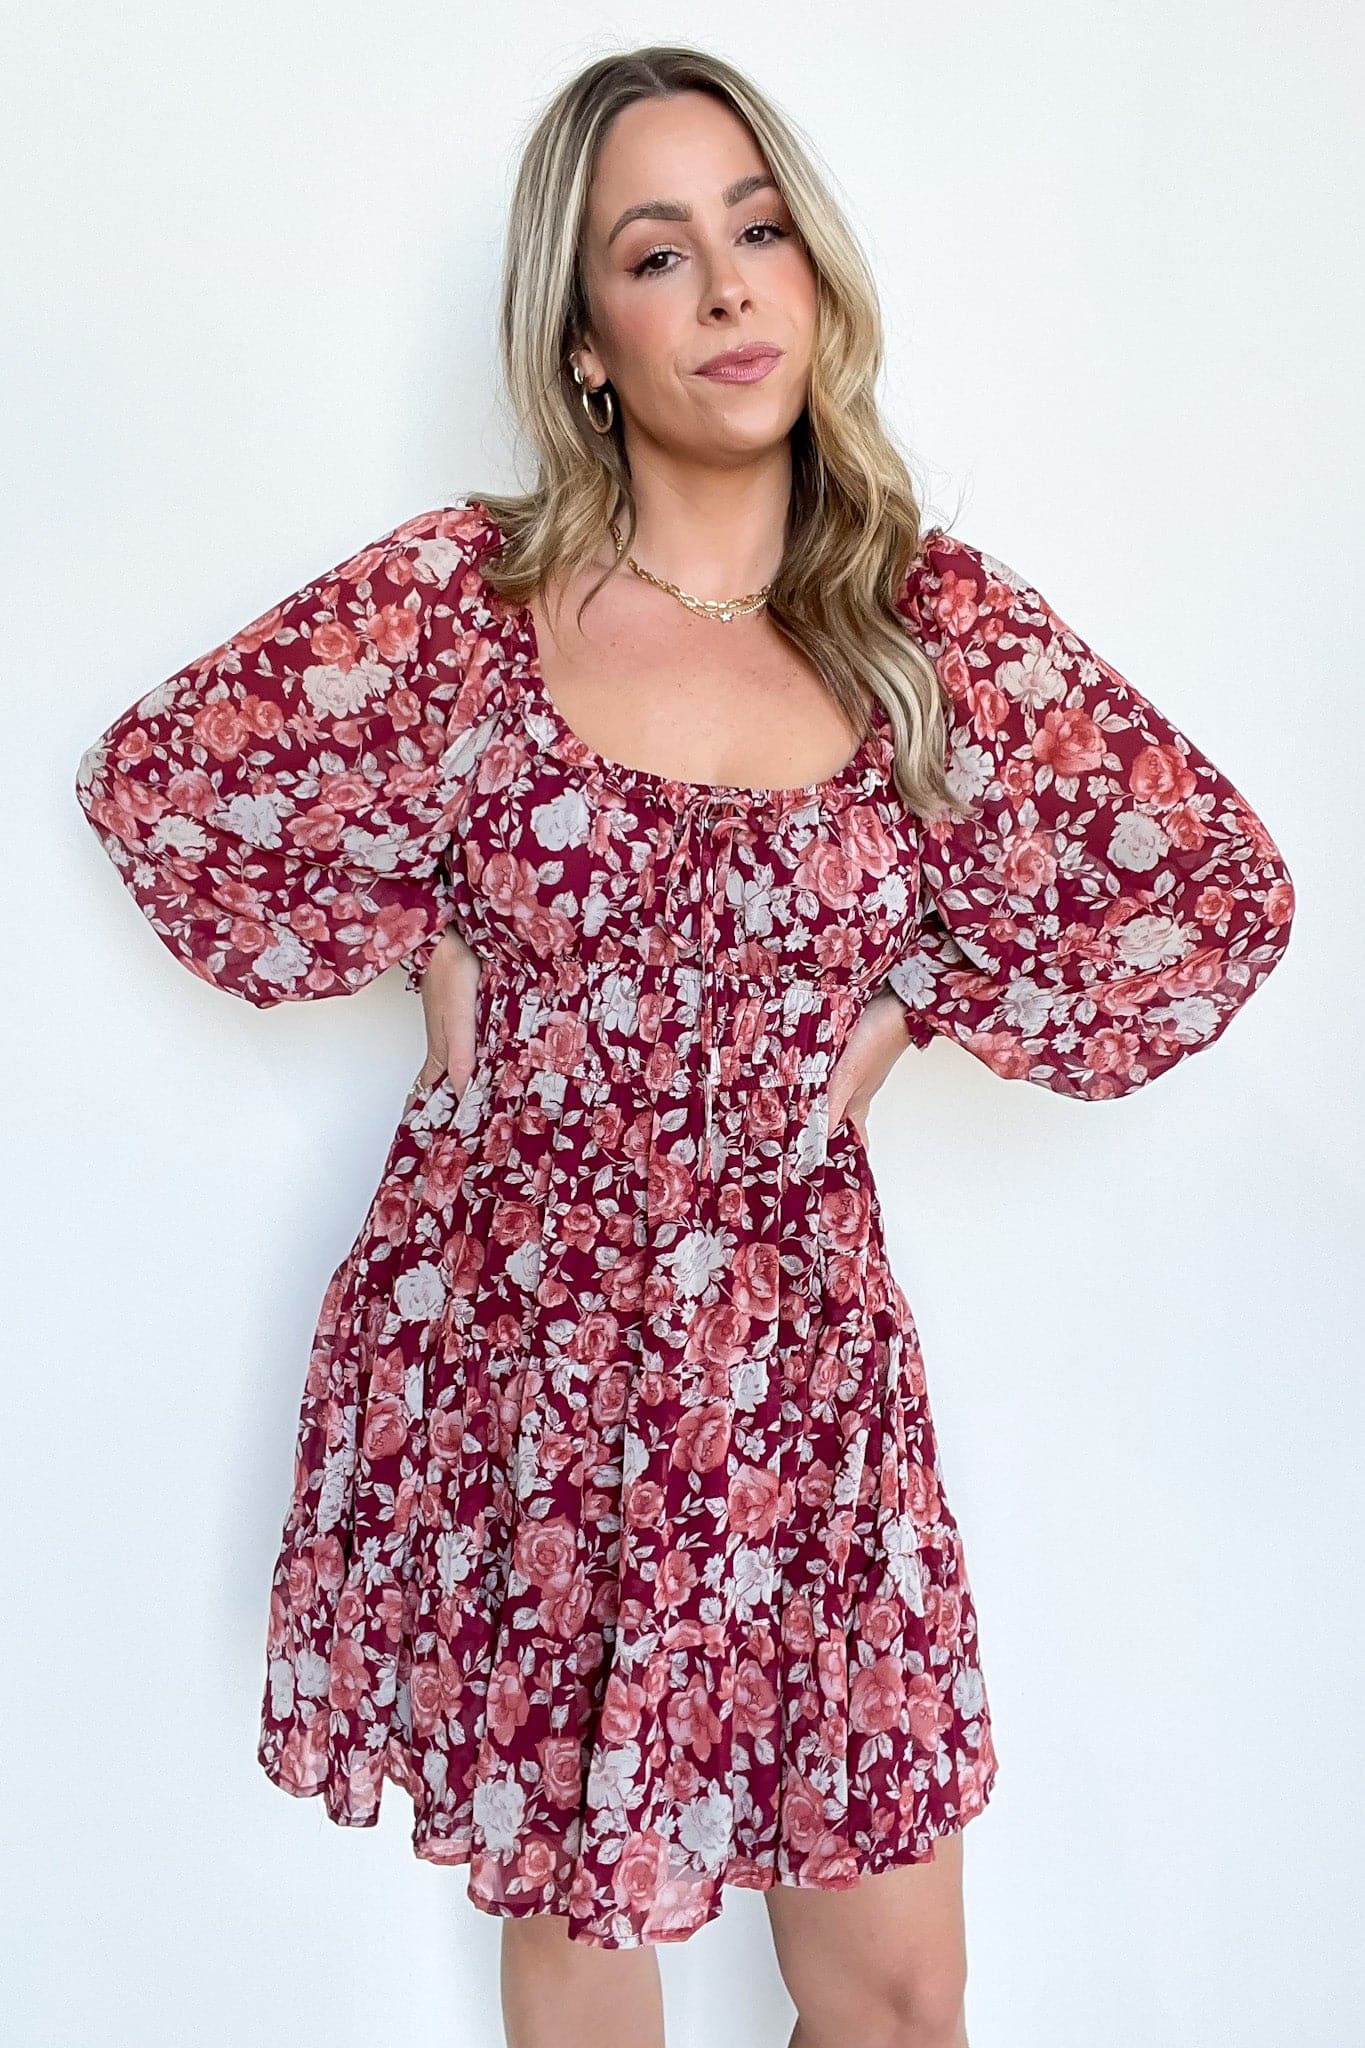  Grettina Floral Square Neck Dress - FINAL SALE - Madison and Mallory